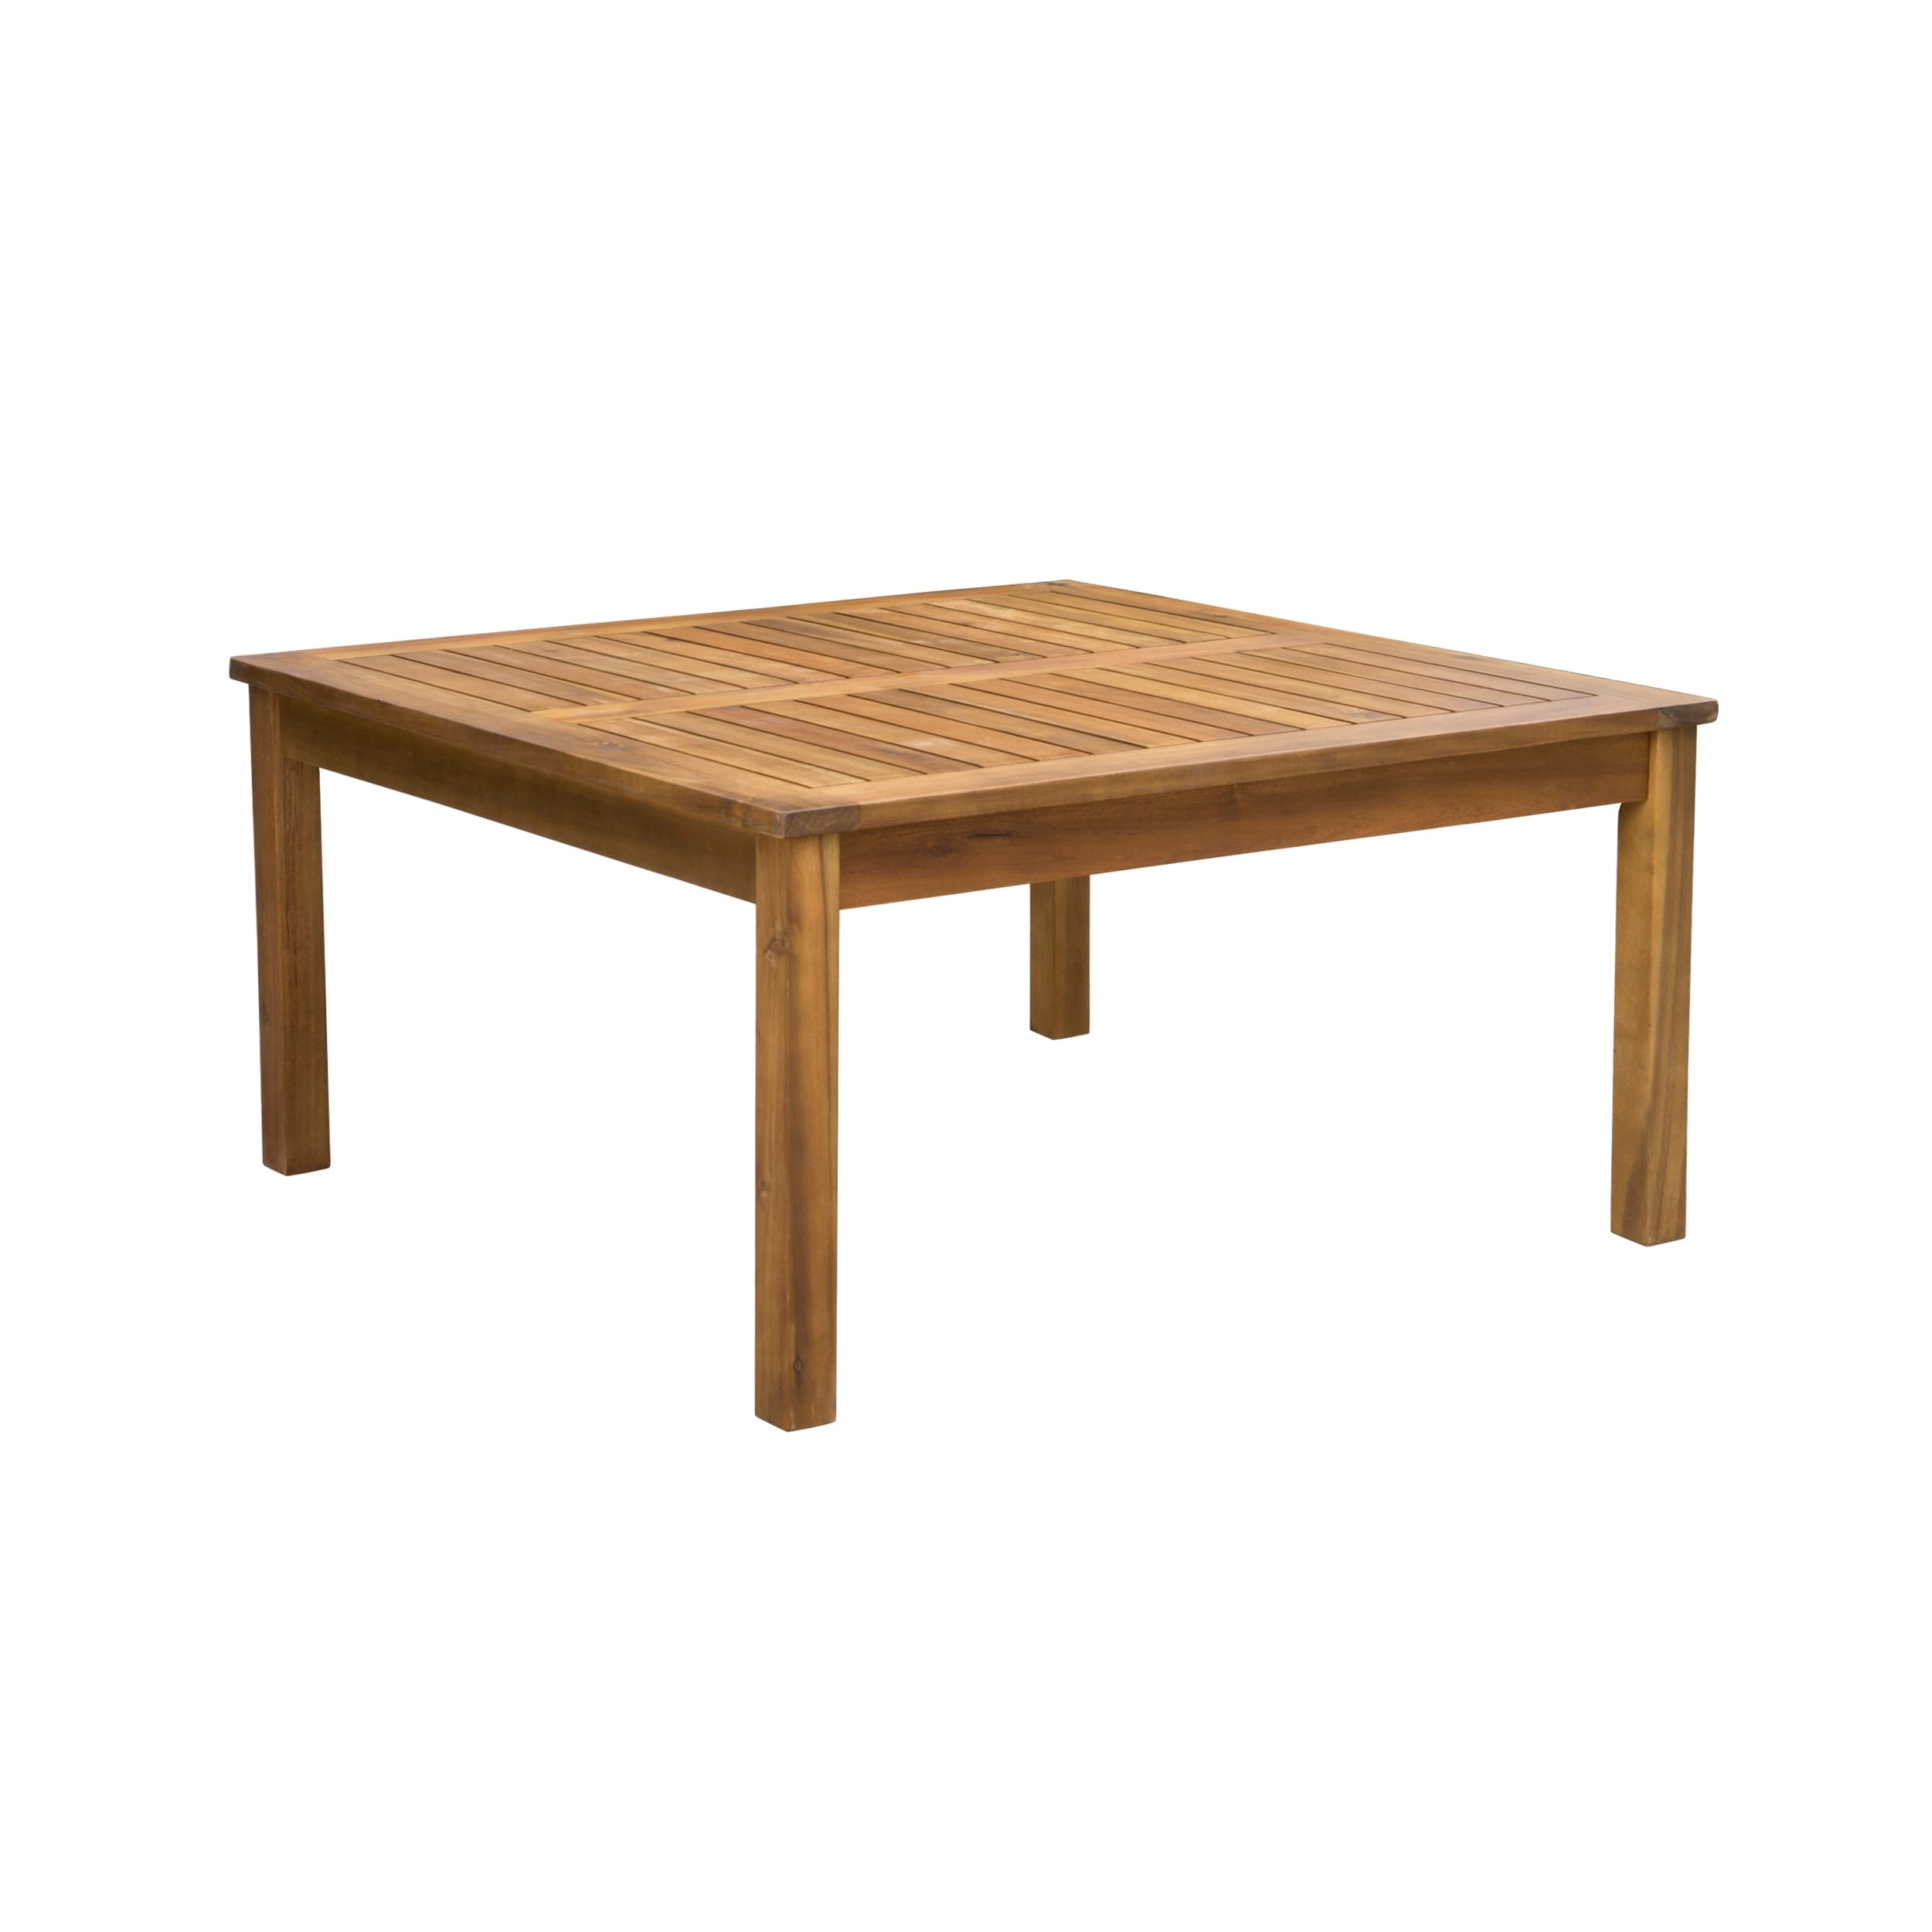 Perla Outdoor Acacia Wood Coffee Table By Christopher Knight Home On Sale Overstock 18067092